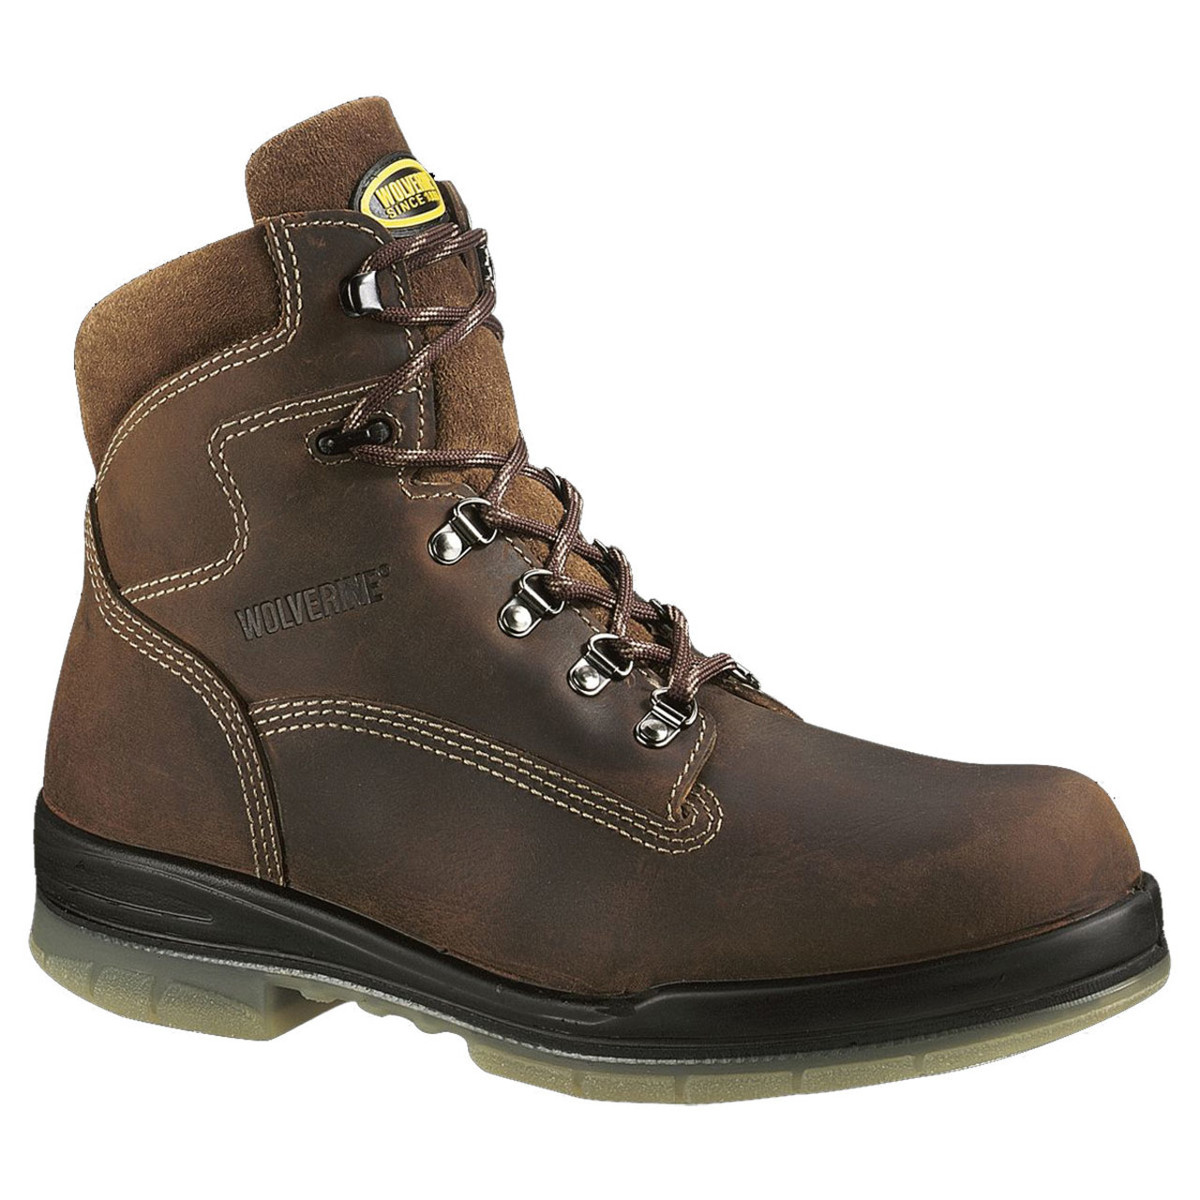 Are Wolverine Work Boots Good